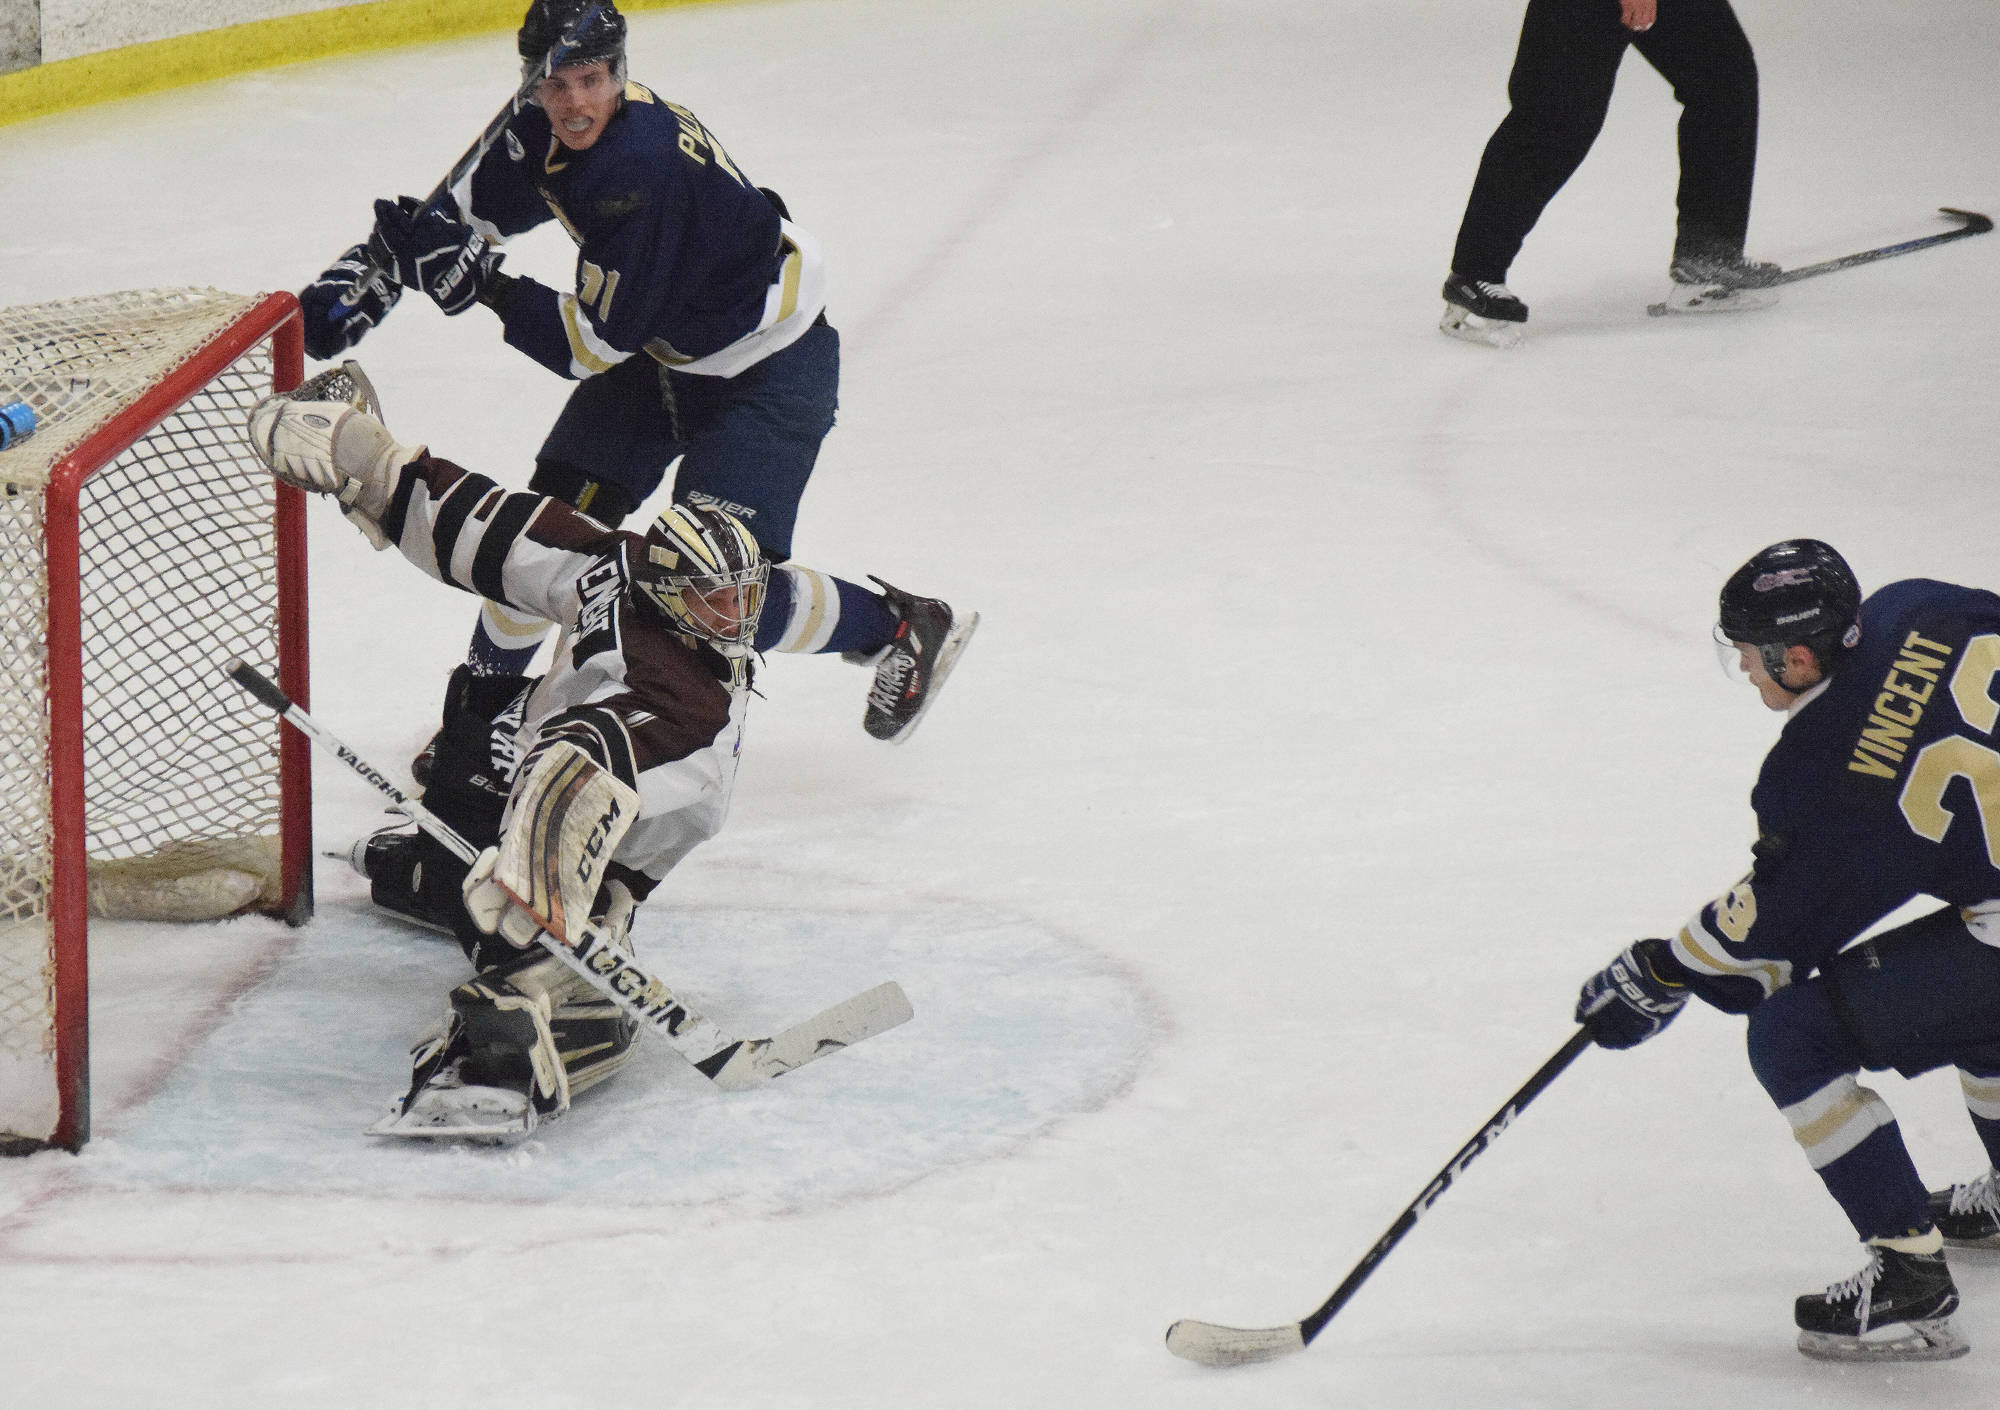 Kenai River goaltender Gavin Enright stretches for a save with Janesville (Wisconsin) skater Jack Vincent bearing down on him Friday night at the Soldotna Regional Sports Complex. (Photo by Joey Klecka/Peninsula Clarion)